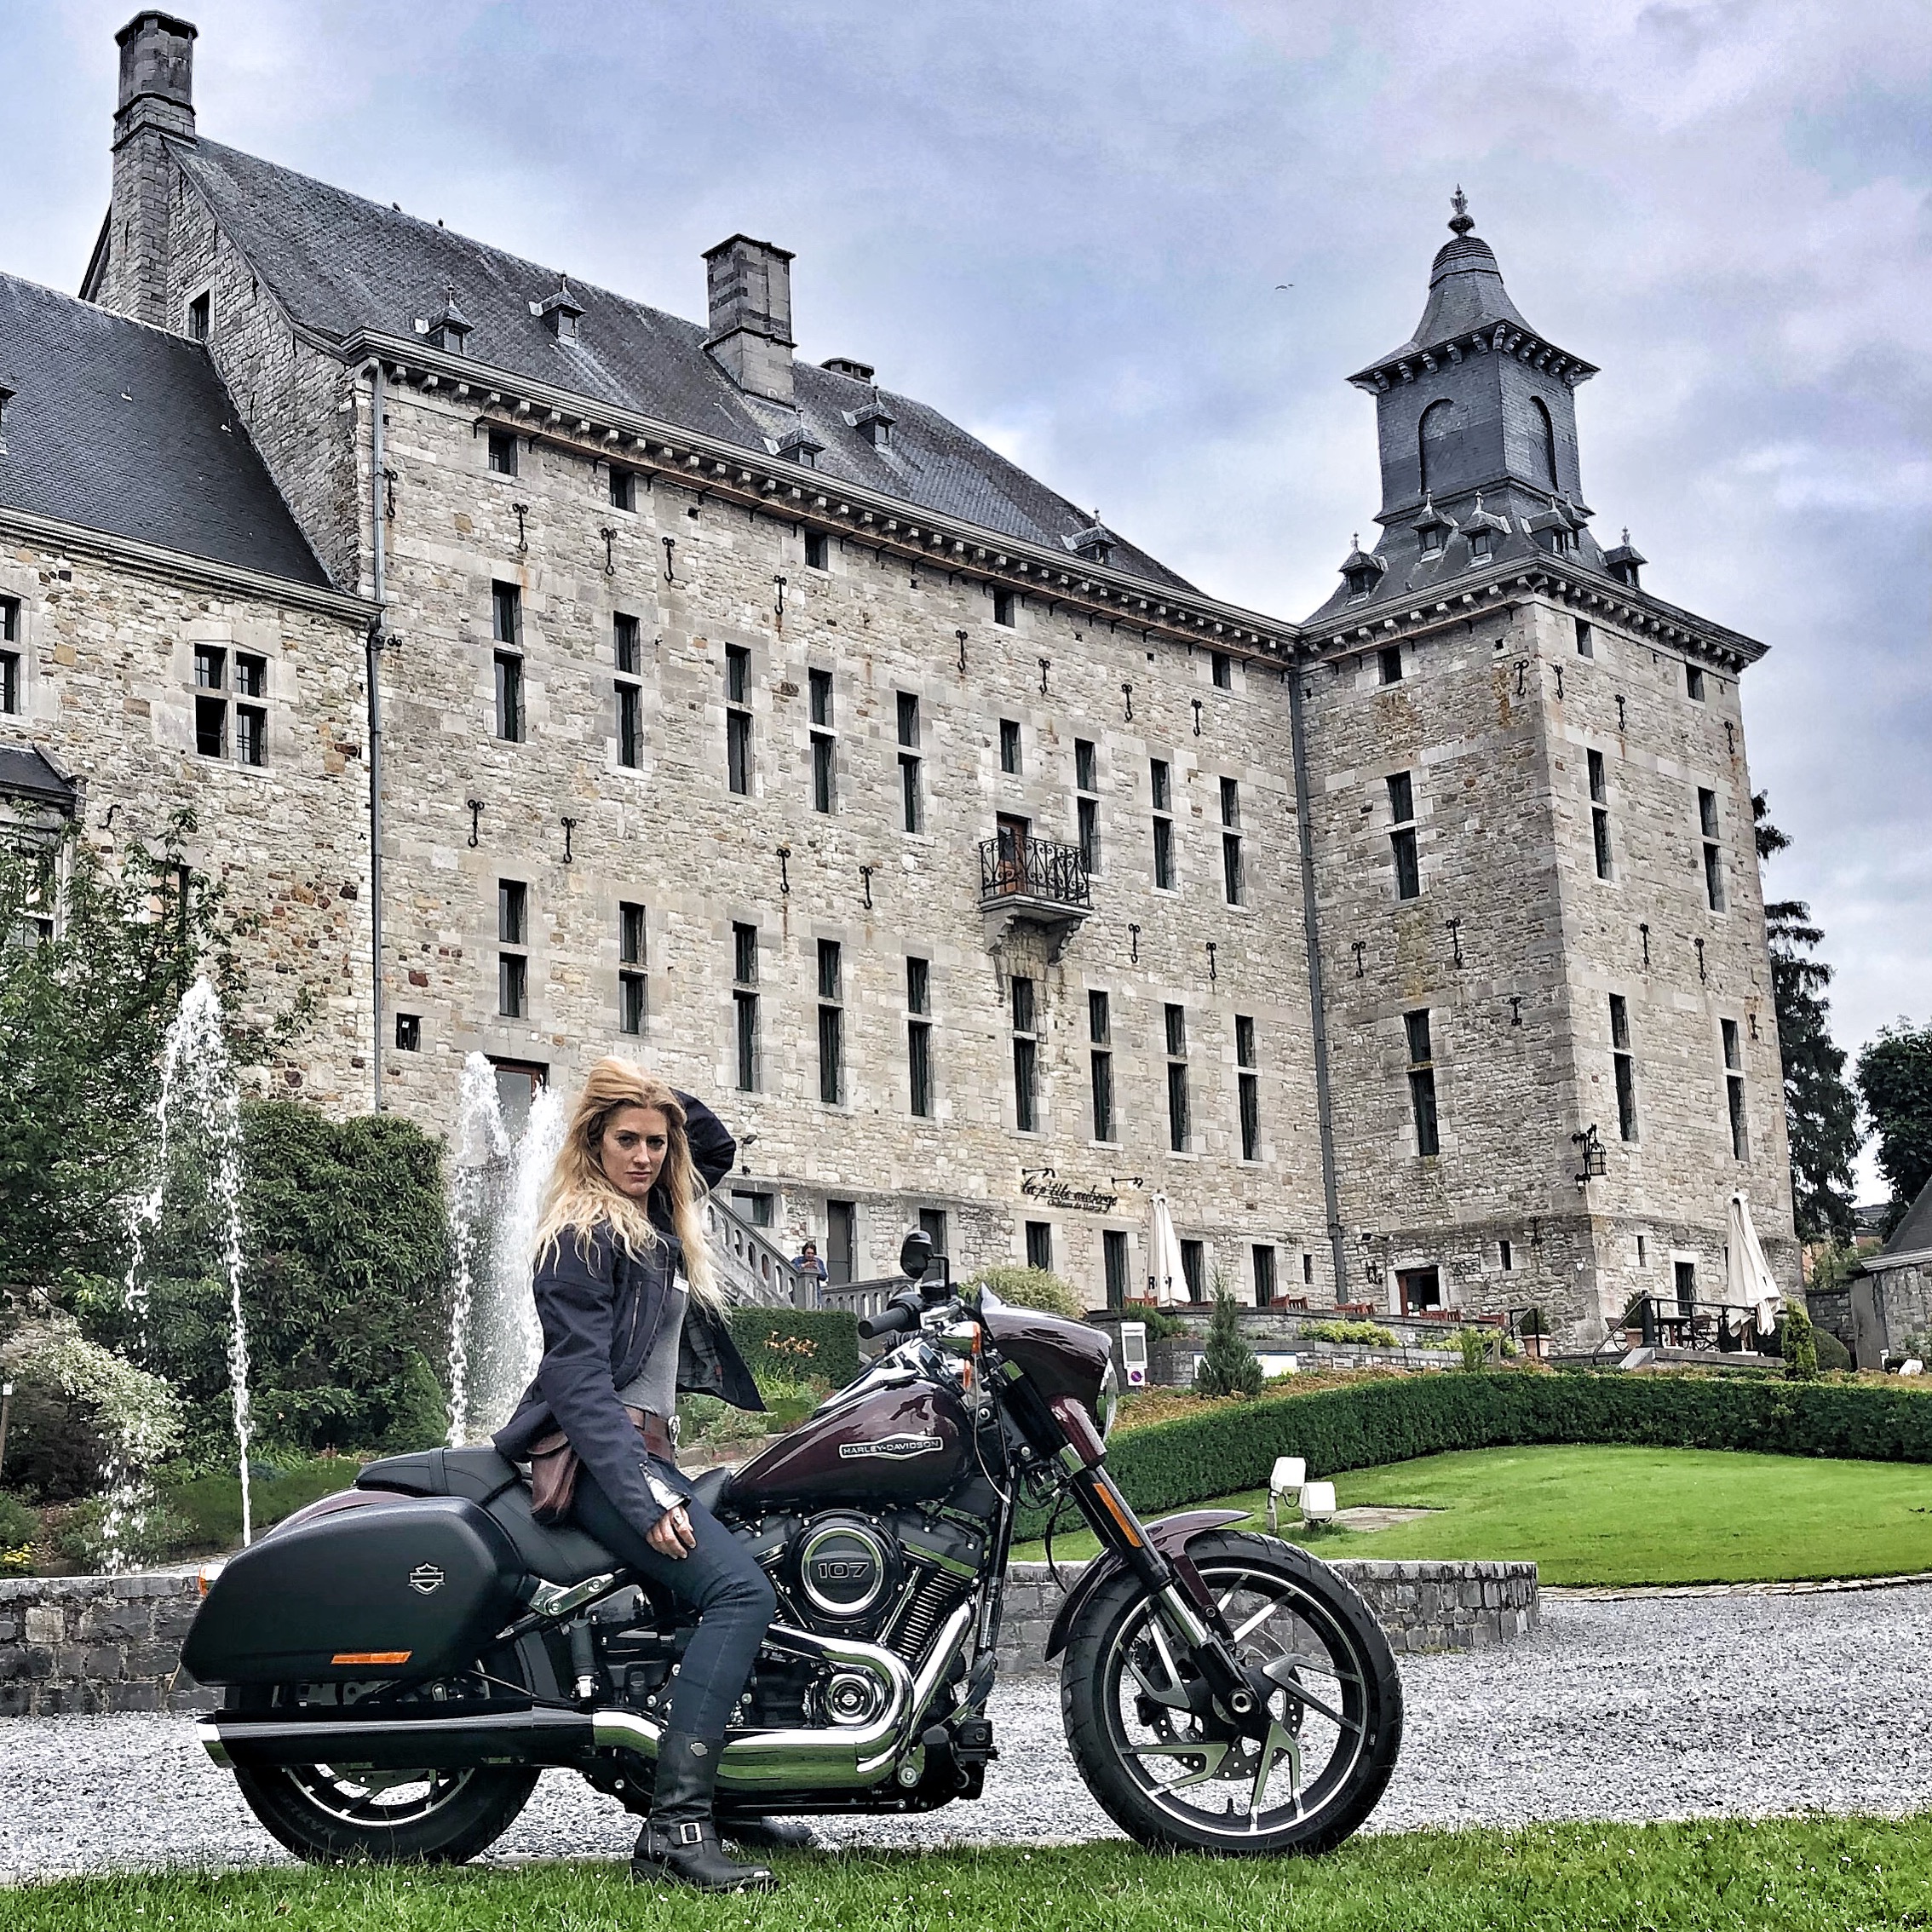 2018 Harley-Davidson Sport Glide review and it looks fantastic